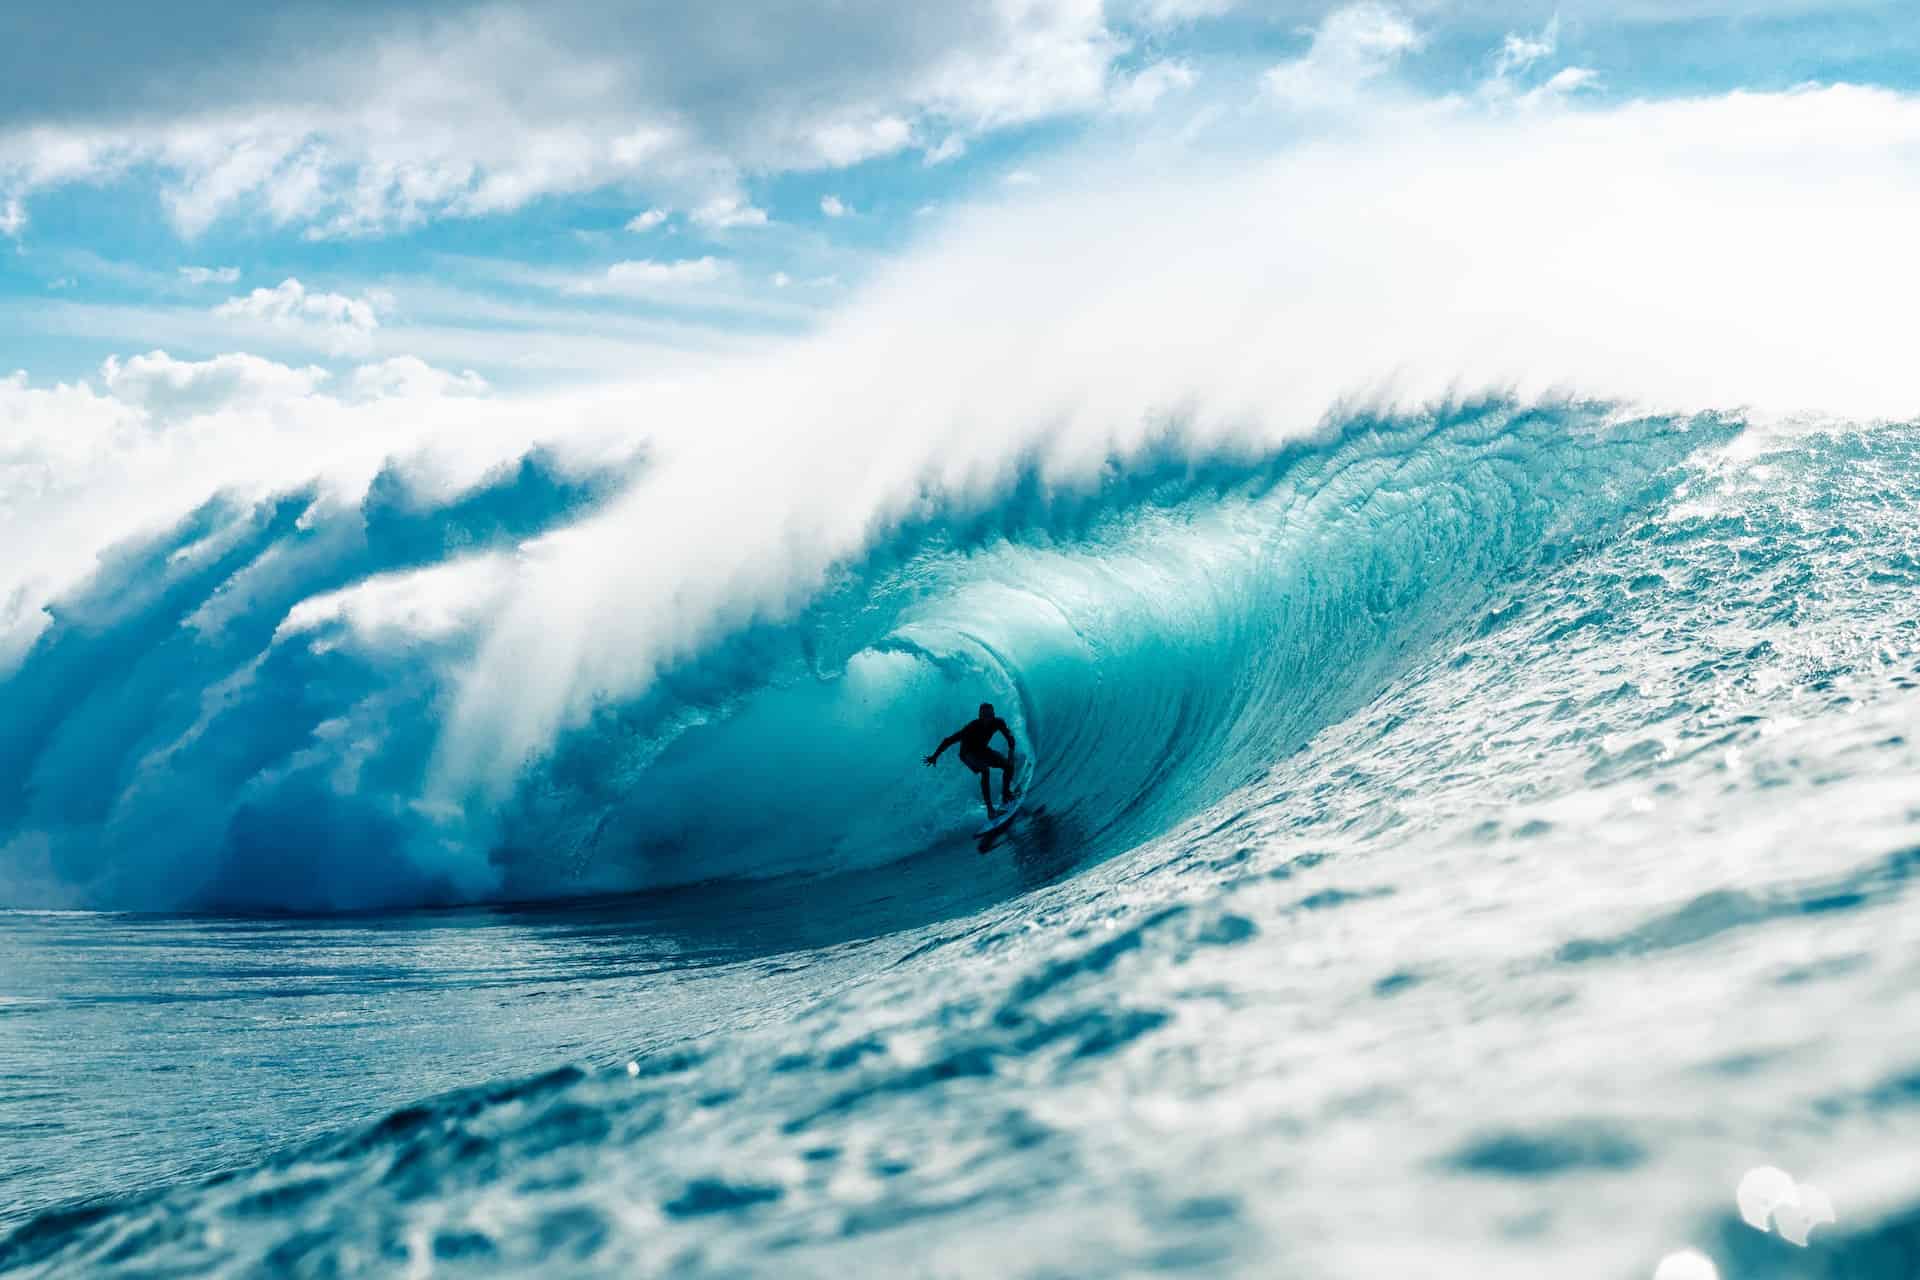 a man surfing as a hobby